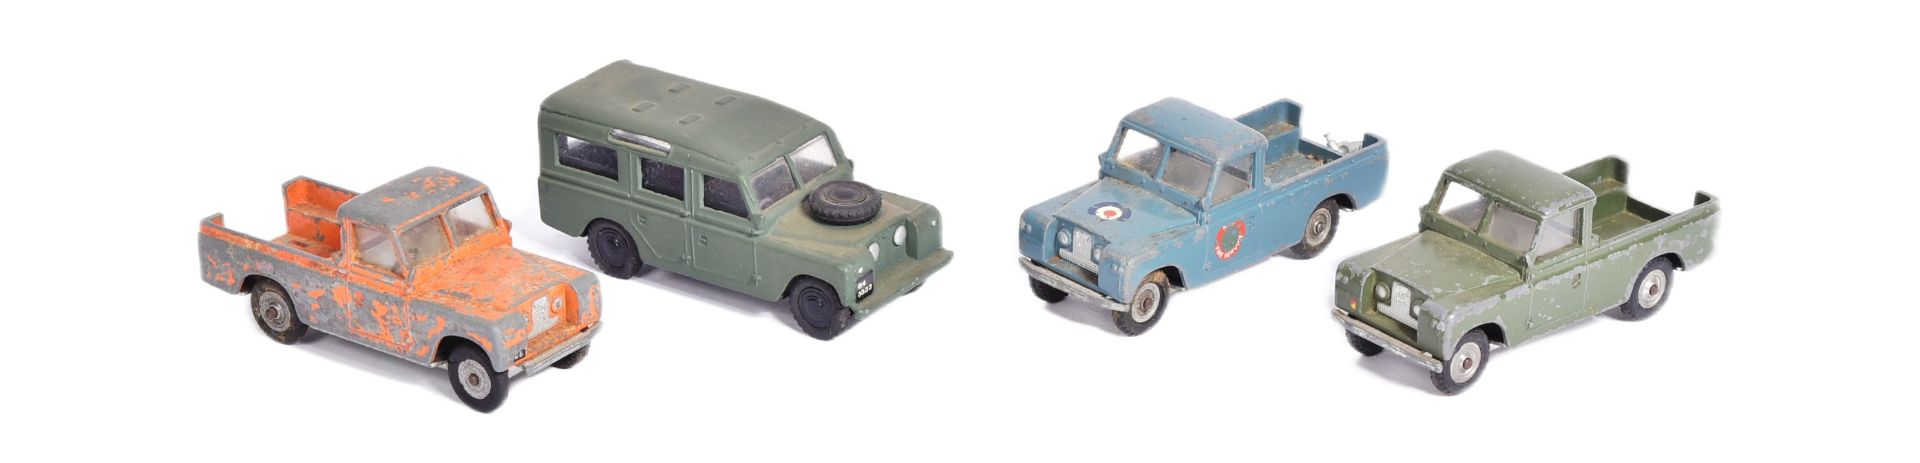 DIECAST - X4 VINTAGE TRIANG SPOT-ON DIECAST MODELS